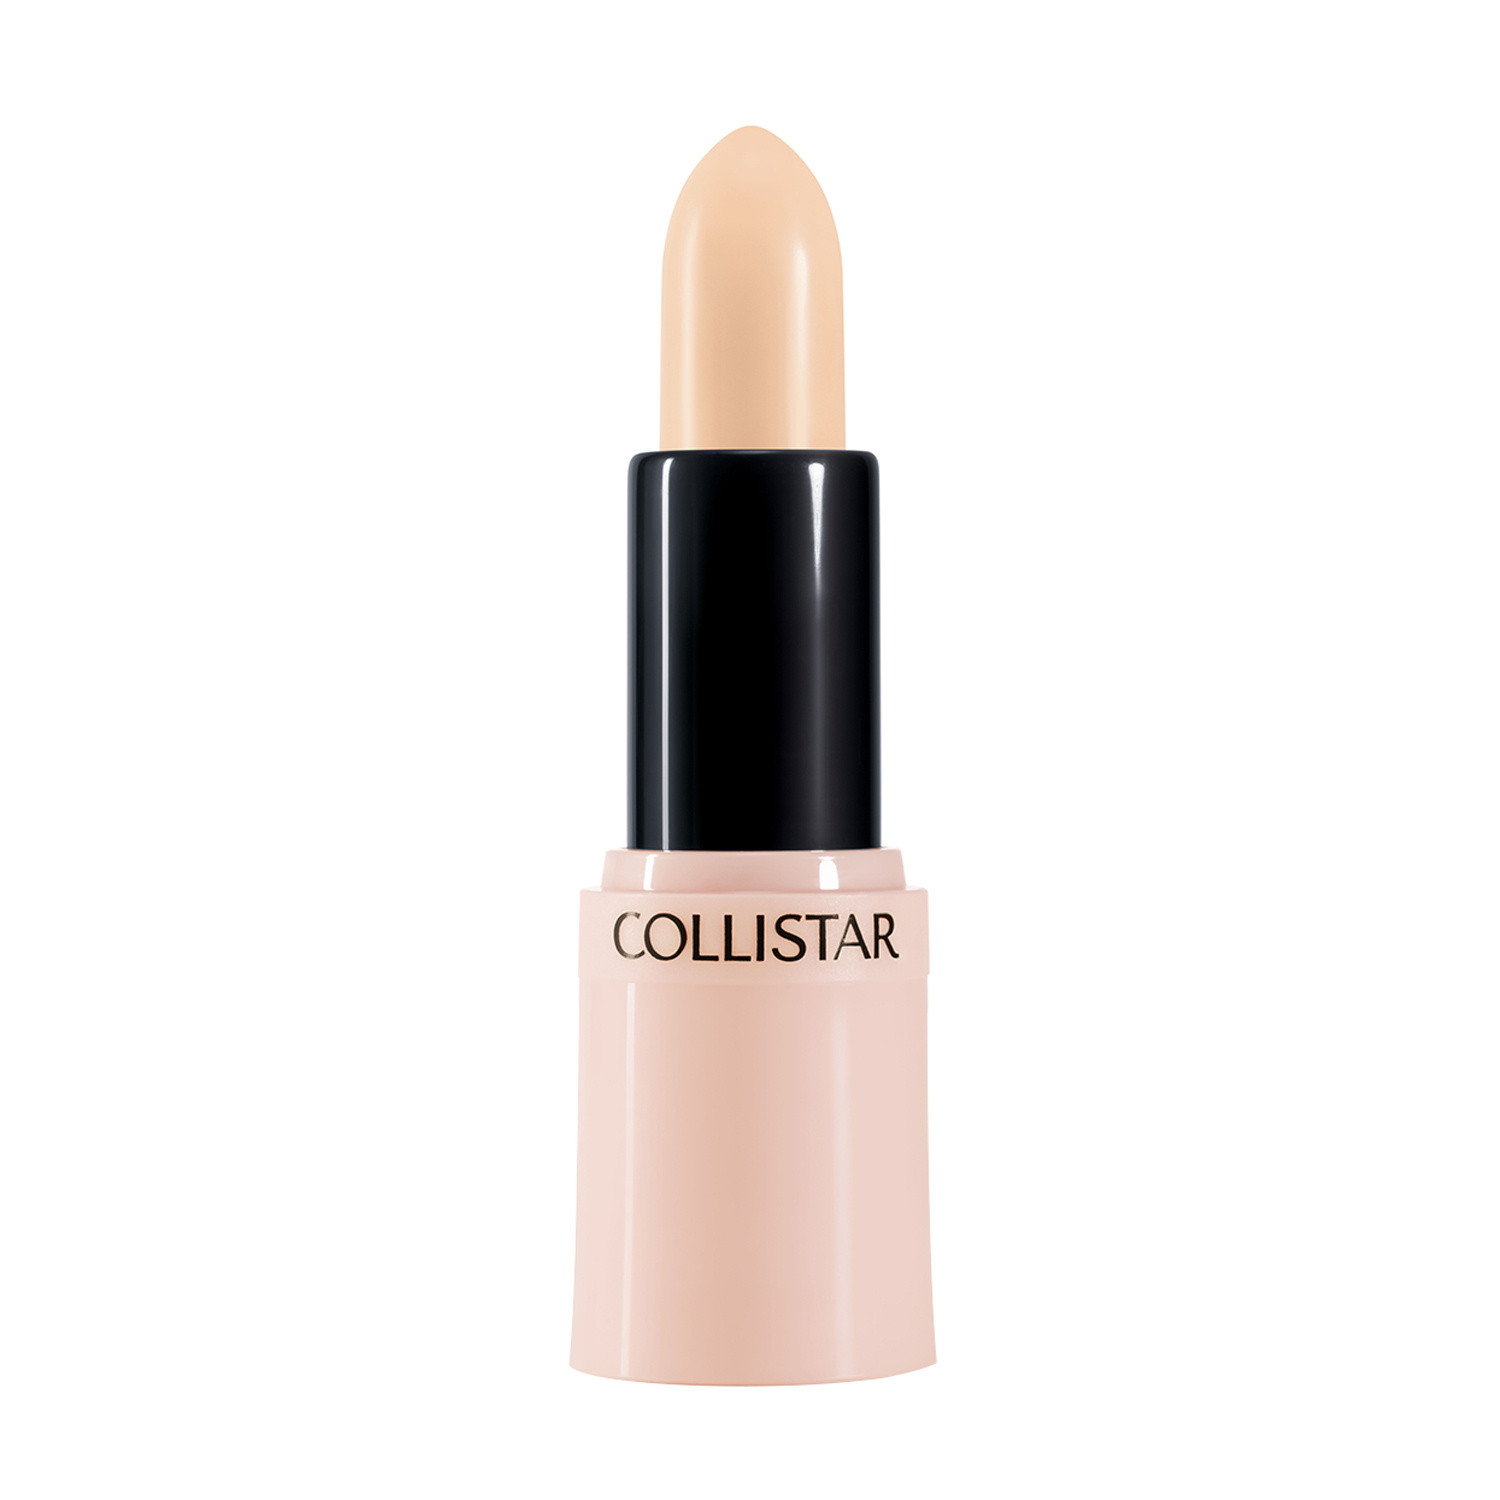 Collistar - Flawless concealer stick - 1 Ivory, White Ivory, large image number 0